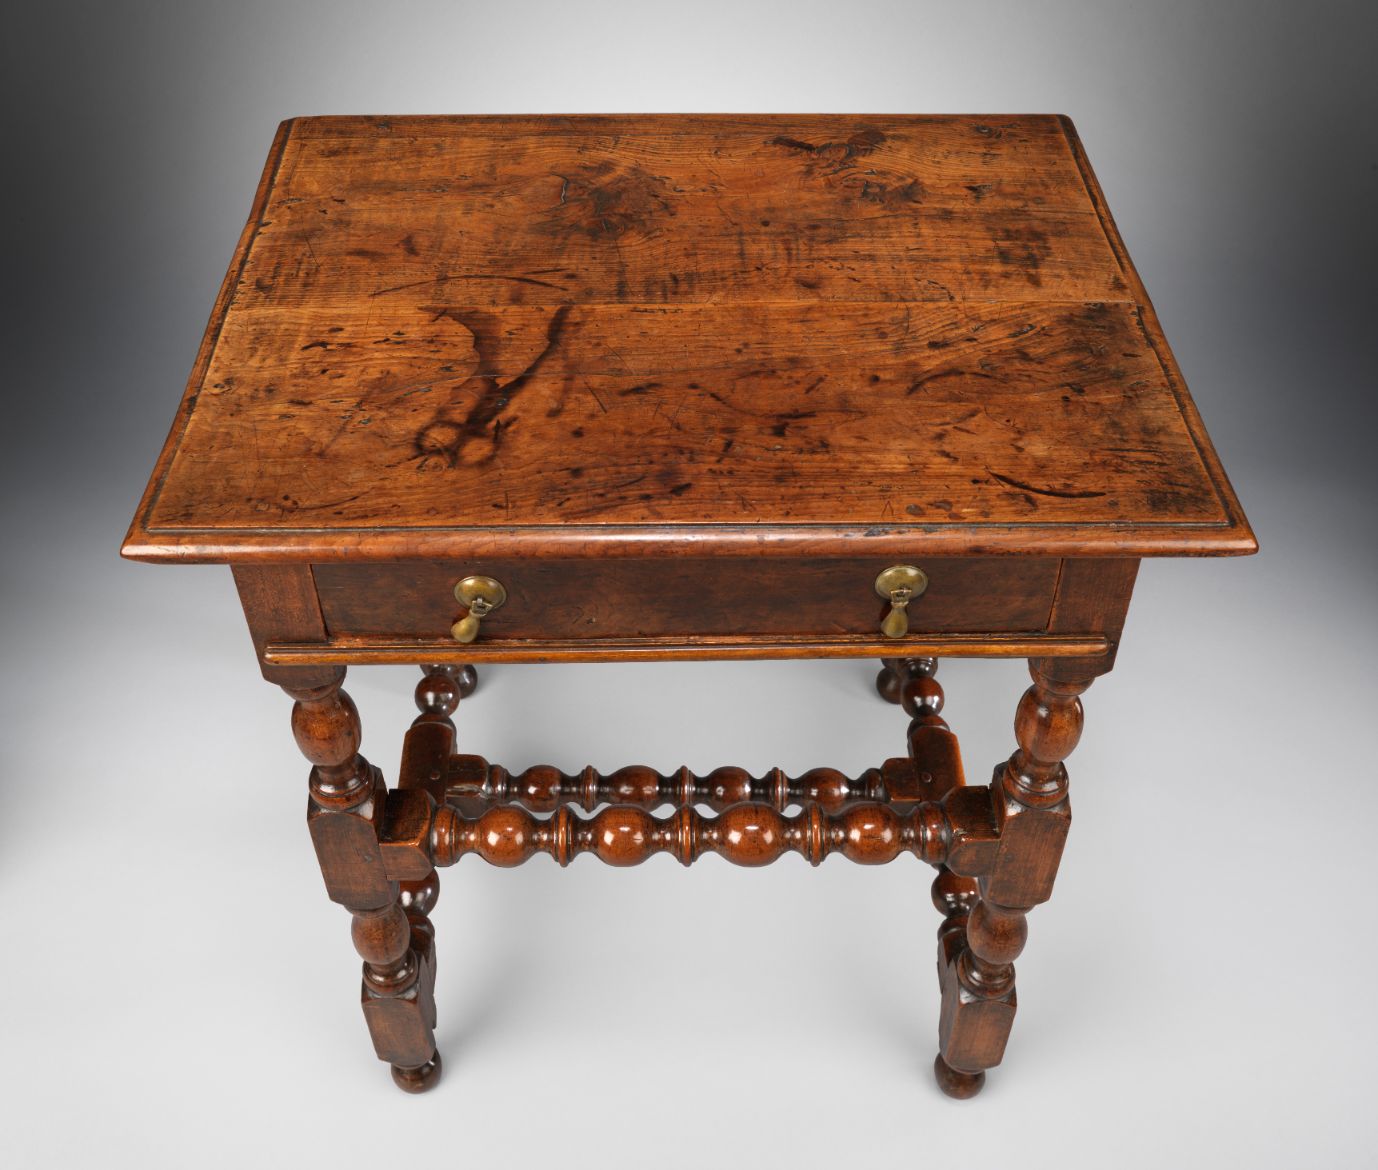 An Exceptional William and Mary Period Single Drawer Side Table